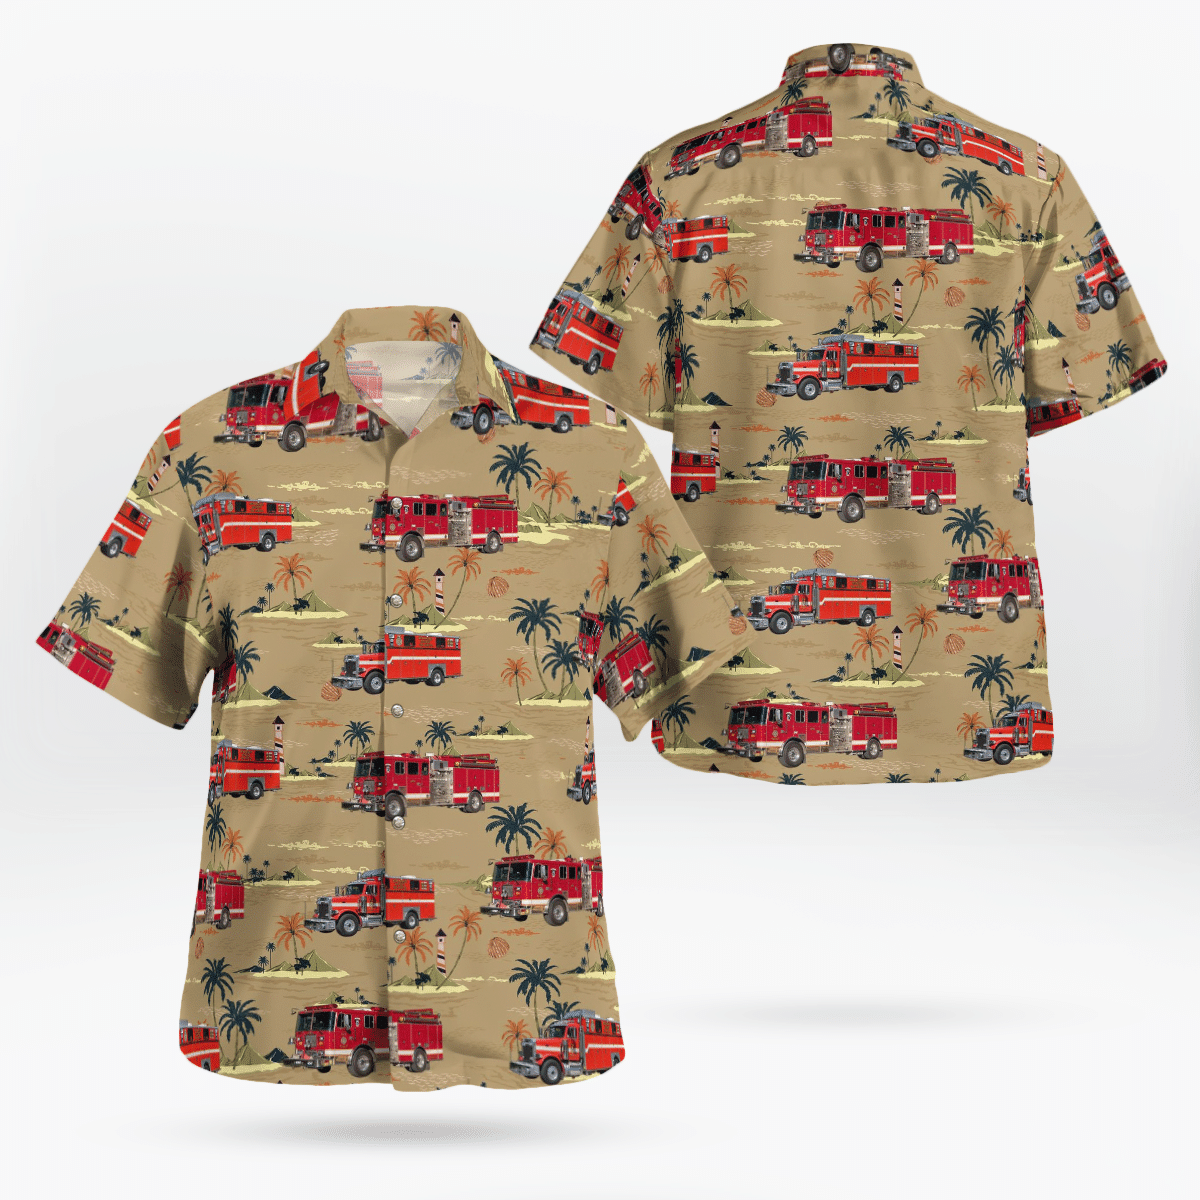 Shop now to find the perfect Hawaii Shirt for your hobby 160